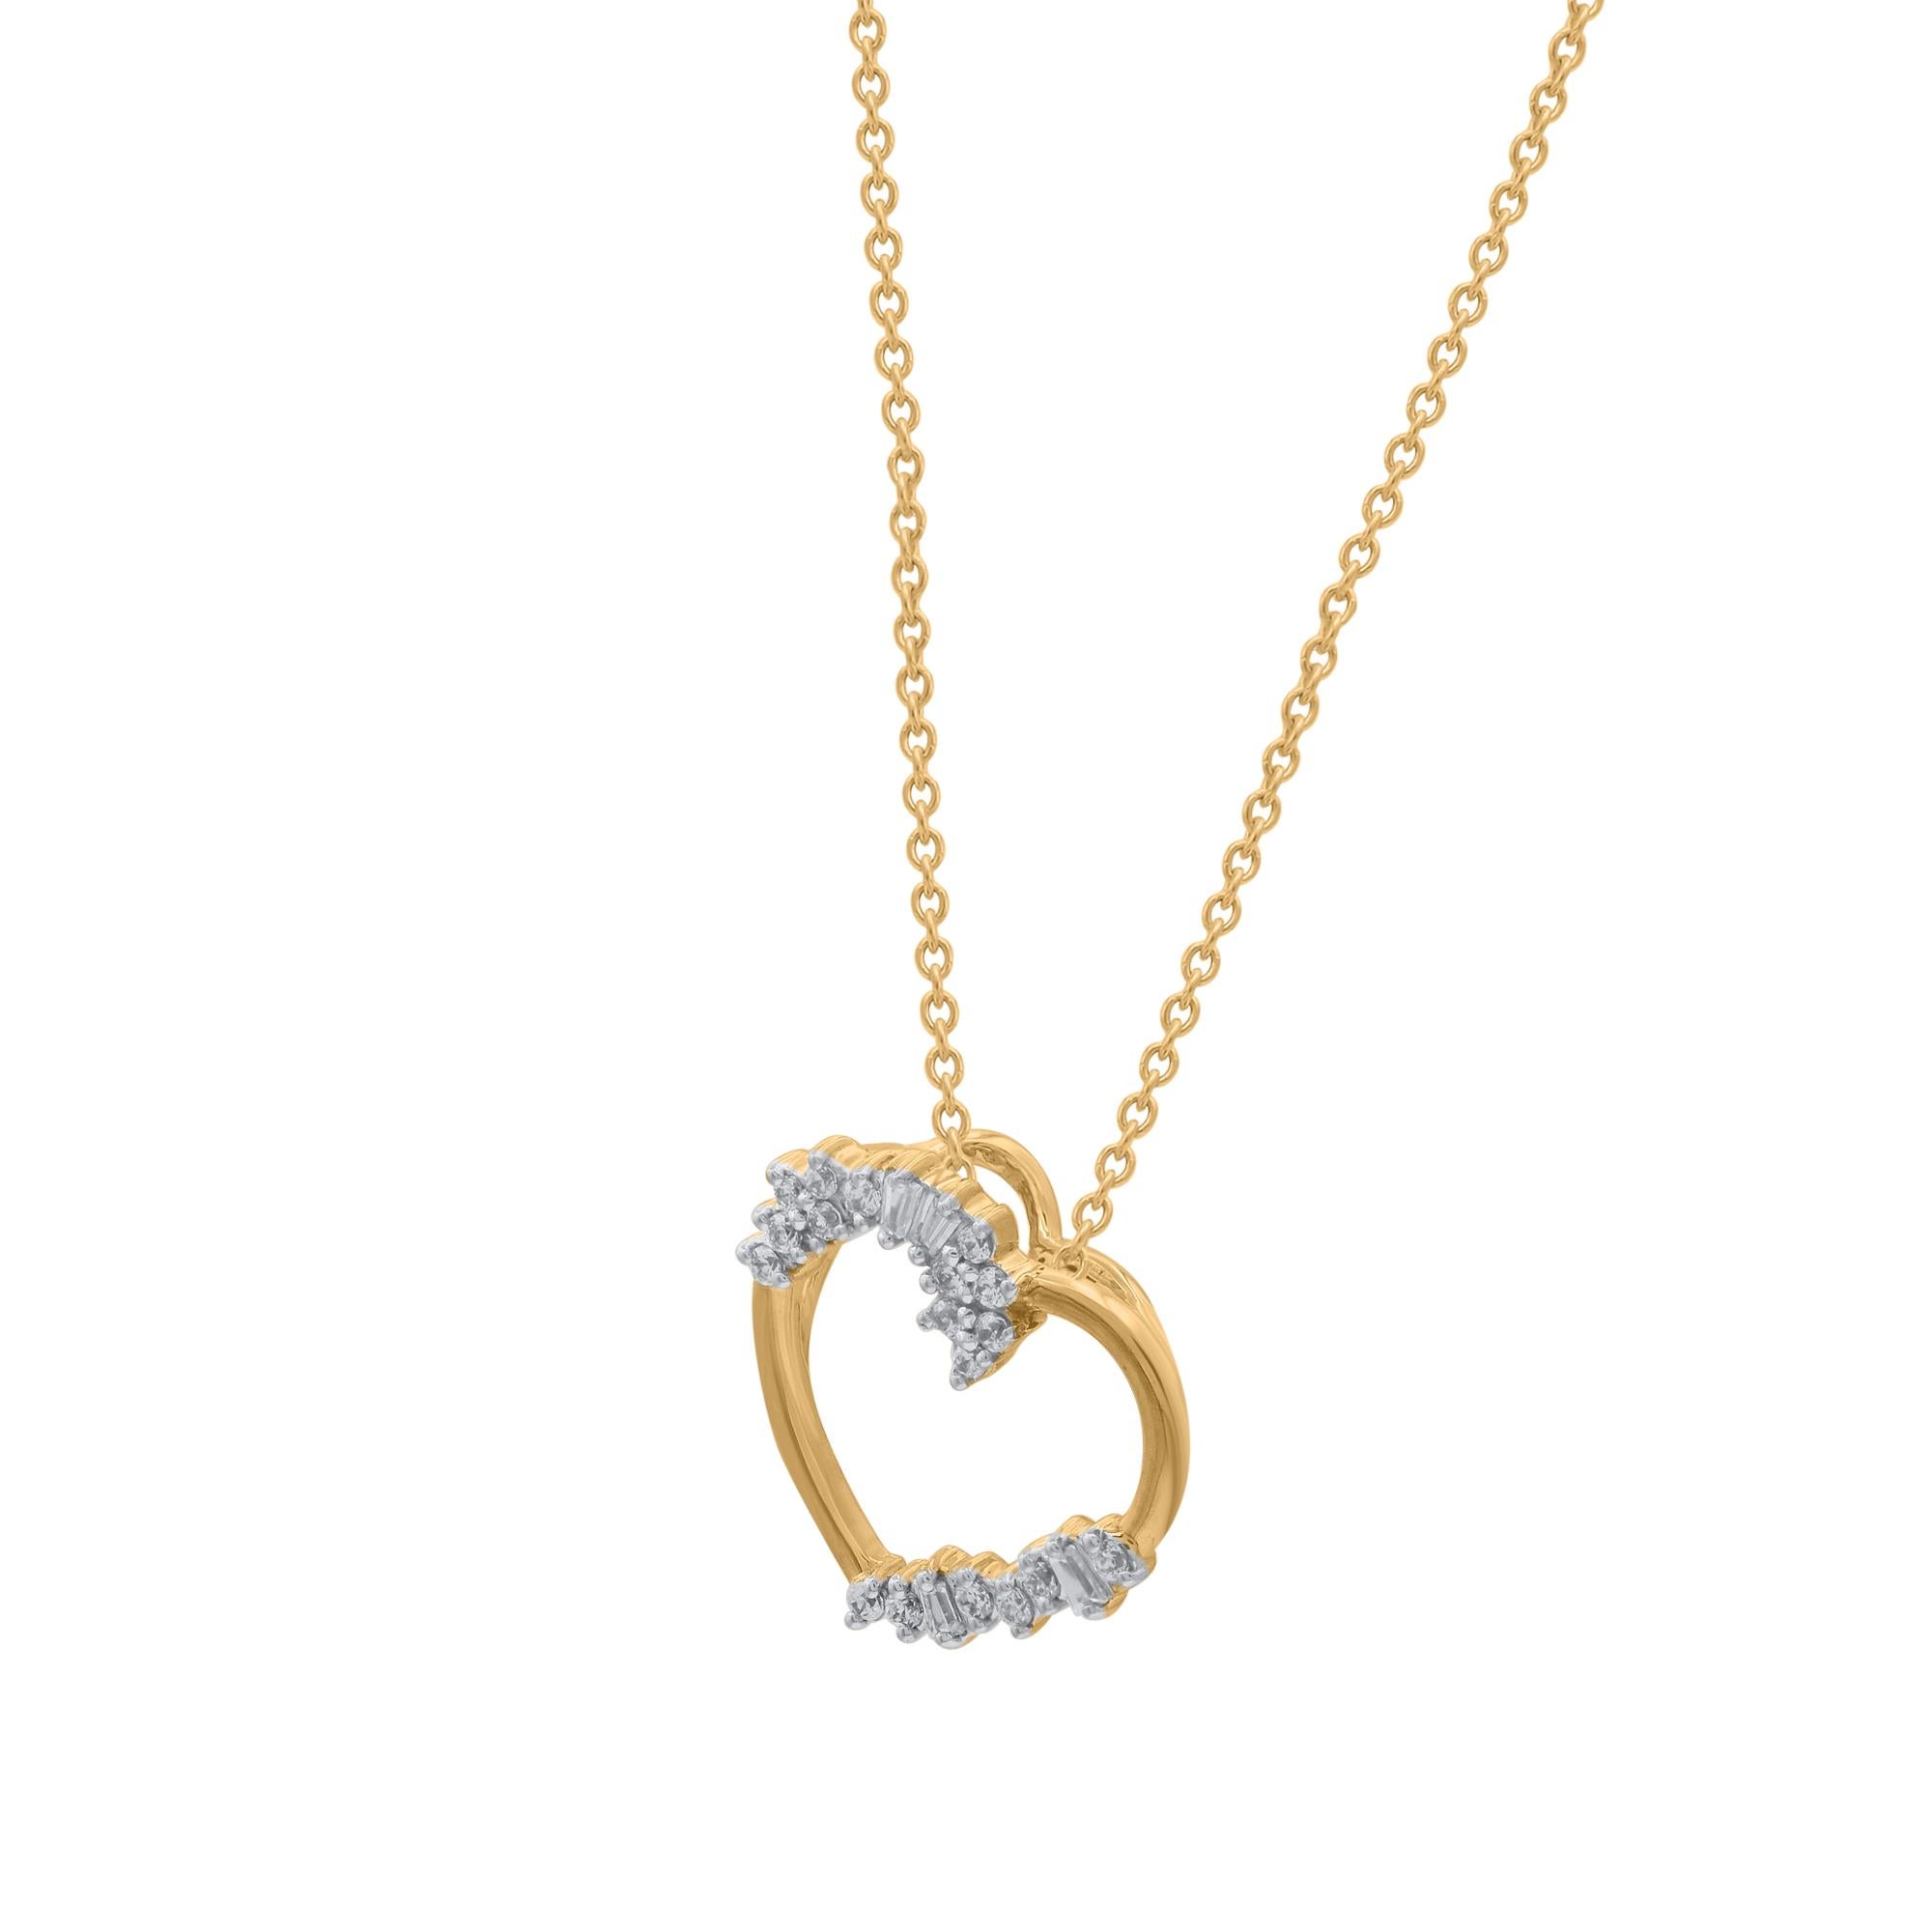 A bright and beautiful symbol of the love you share, this heart pendant is certain to delight. These heart pendant are studded with 23 round and Baguette cut natural diamonds in prong setting in 14KT yellow gold. Diamonds are graded as H-I color and